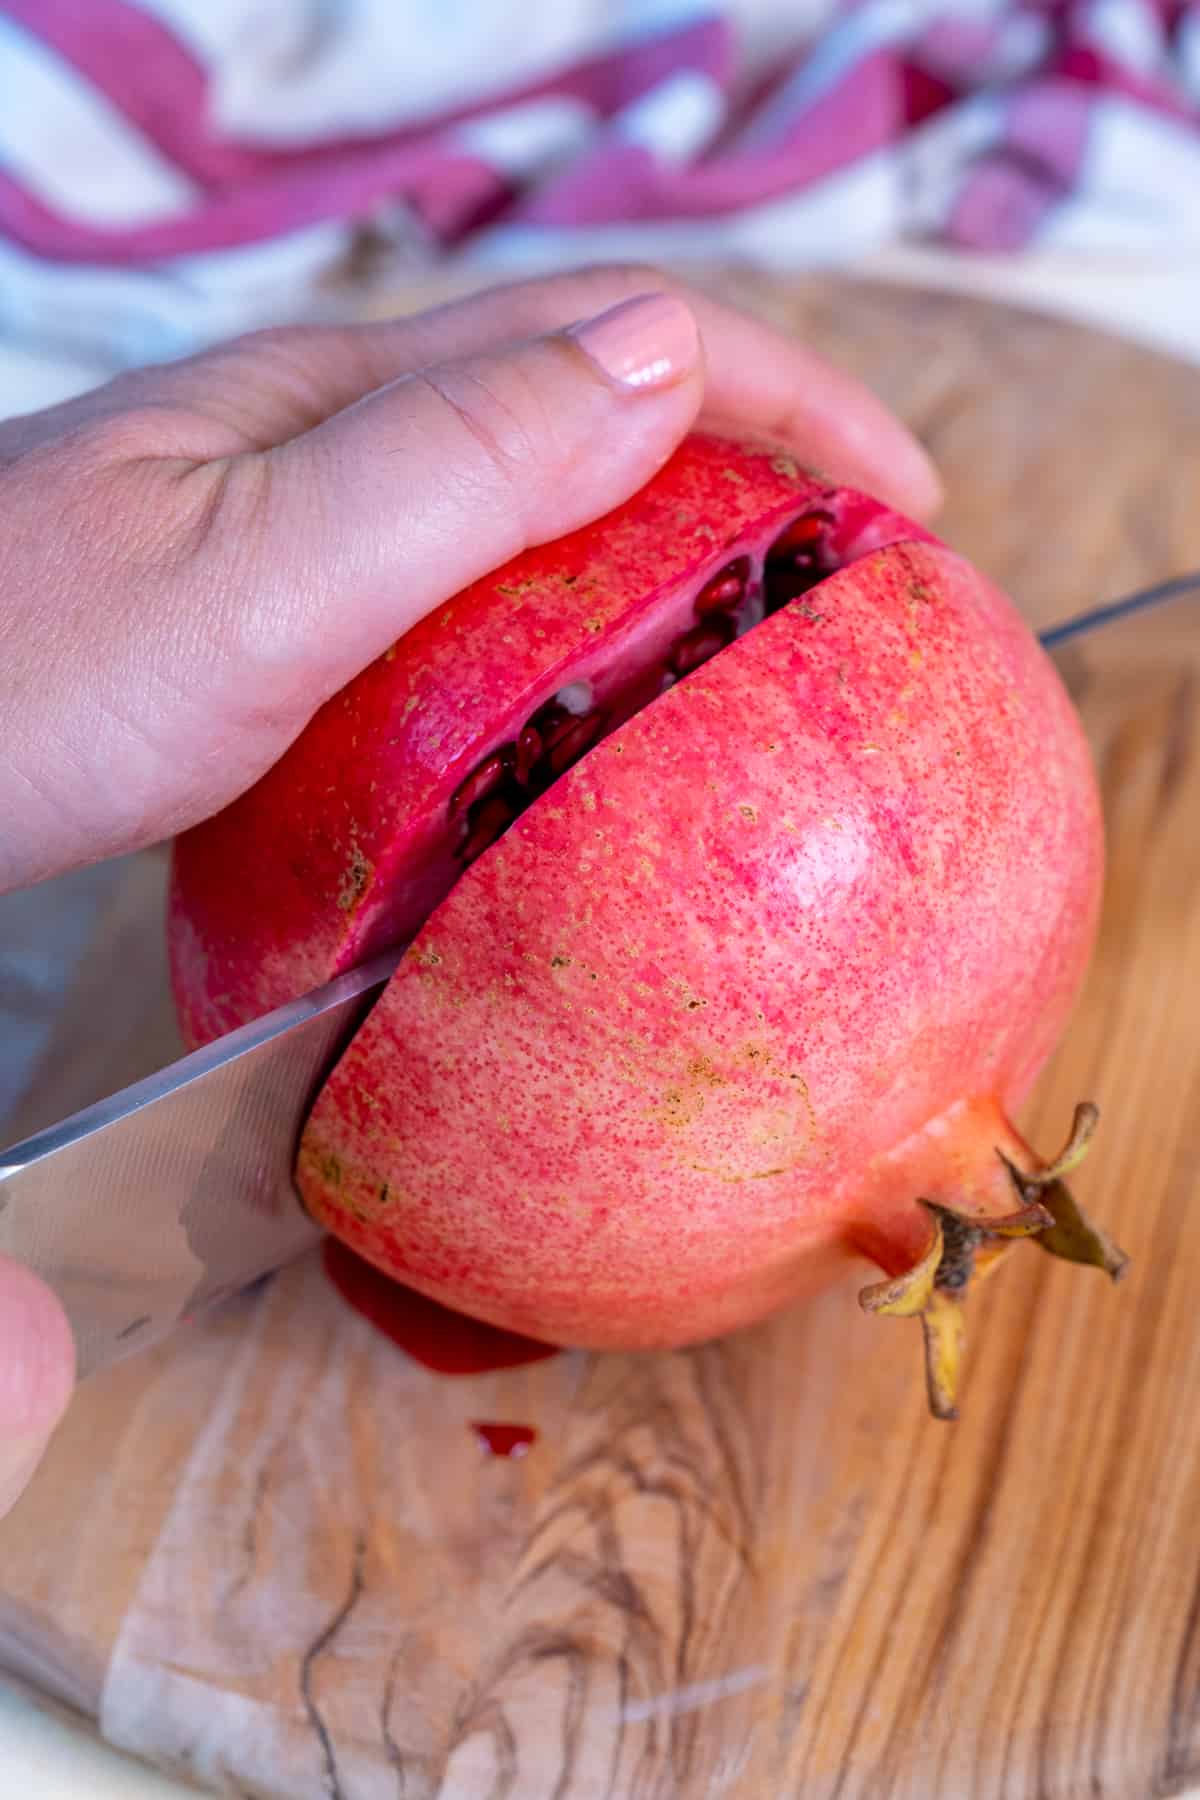 Hands showing how to cut a pomegranate into two horizontally.